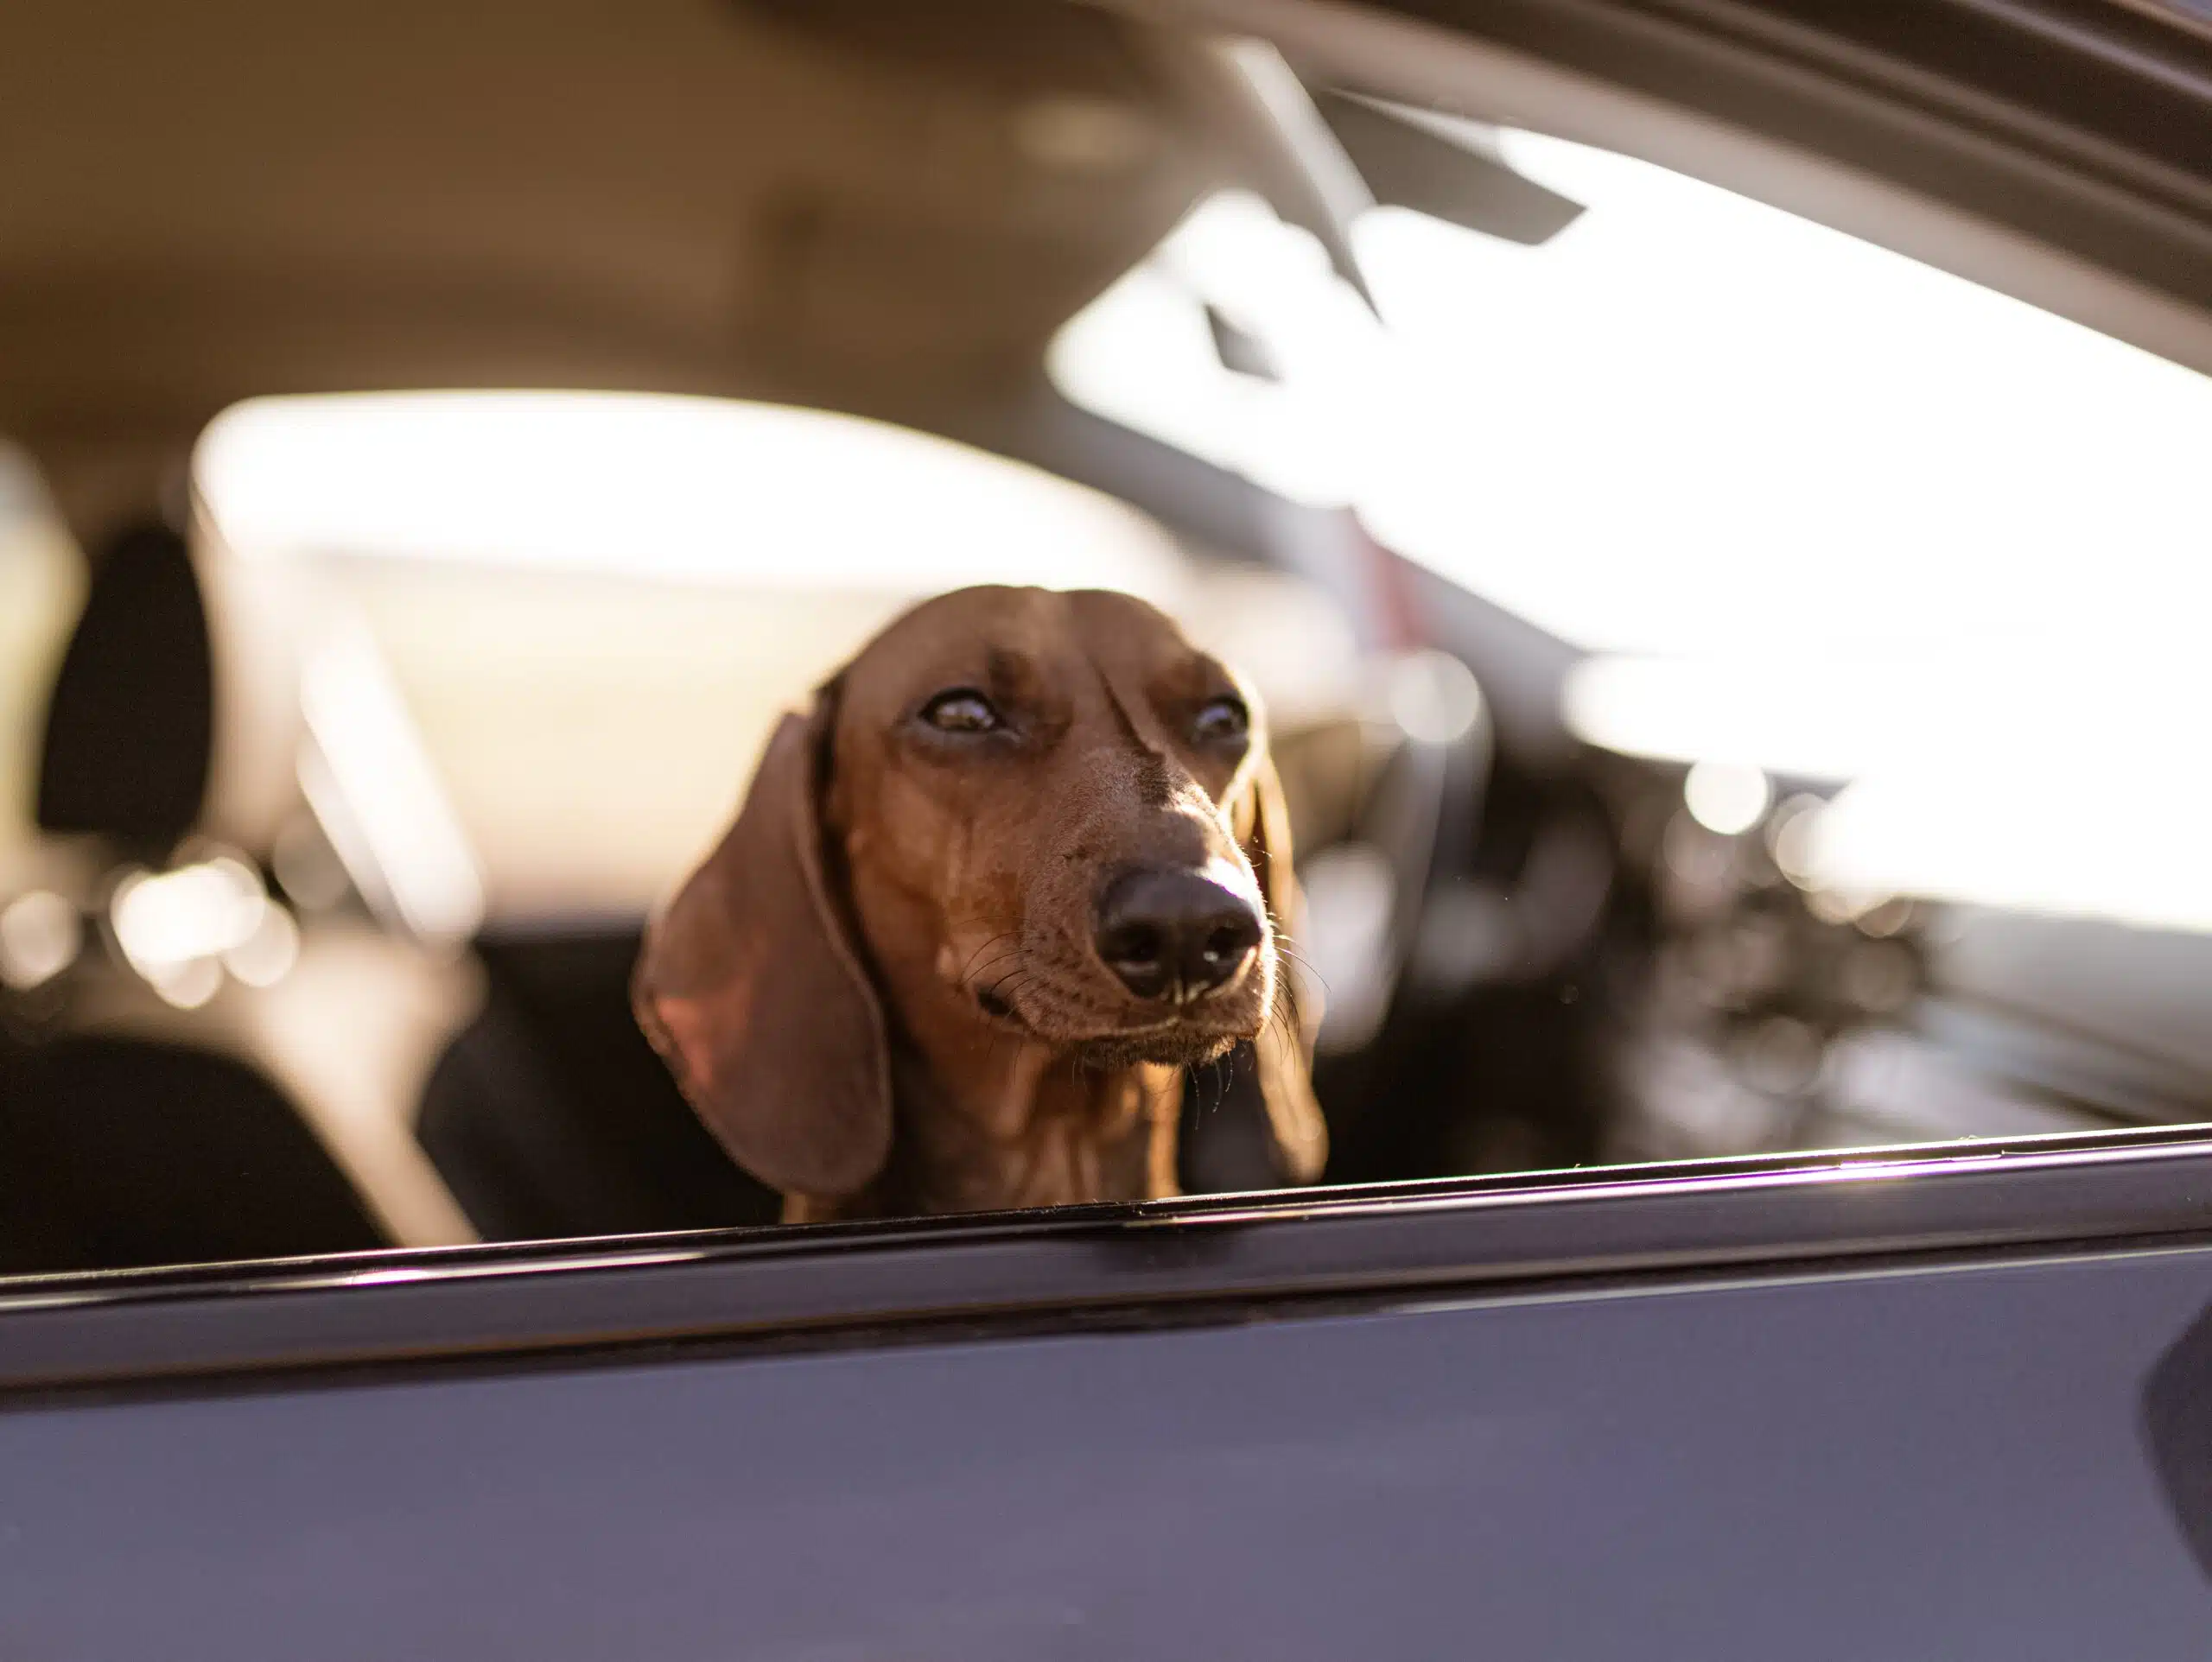 This brown Dachshund gets comfortable on a dog car seat cover.